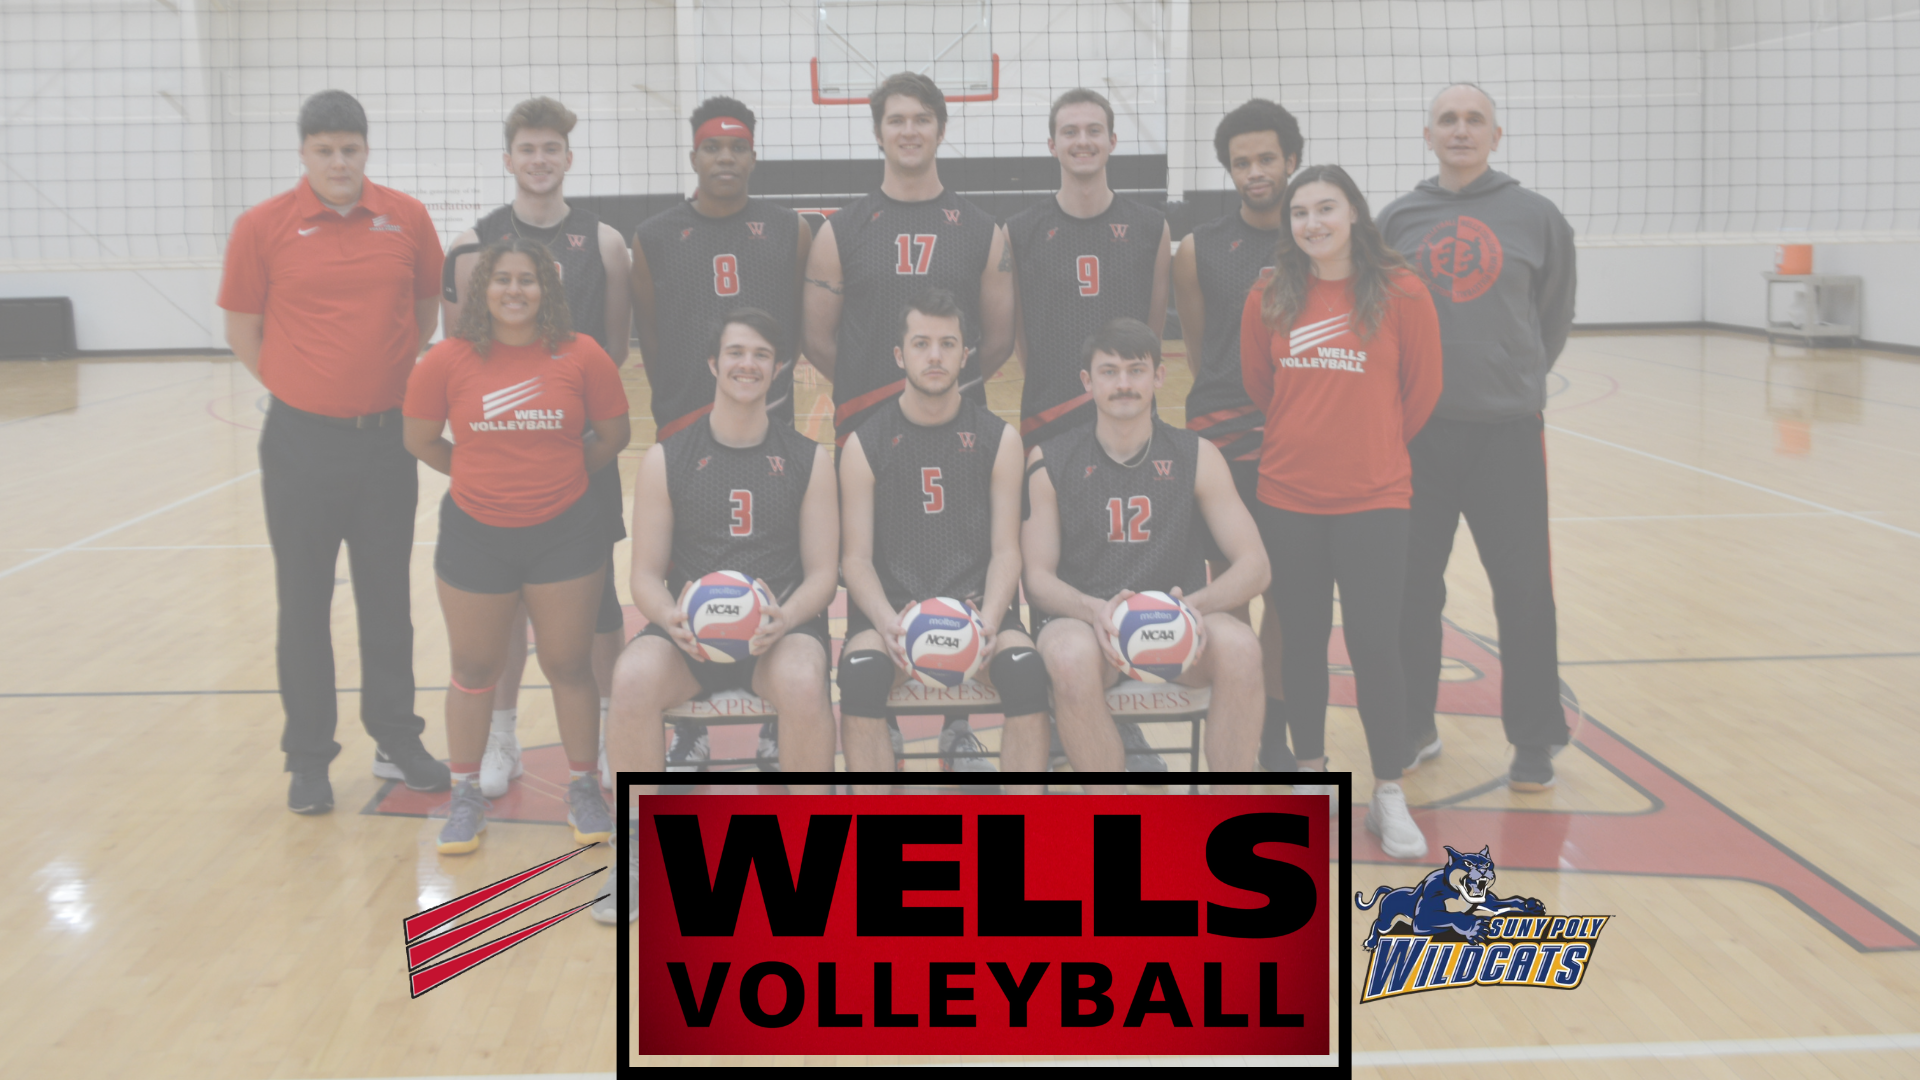 Wells College Hosts SUNY Poly For Men's Volleyball